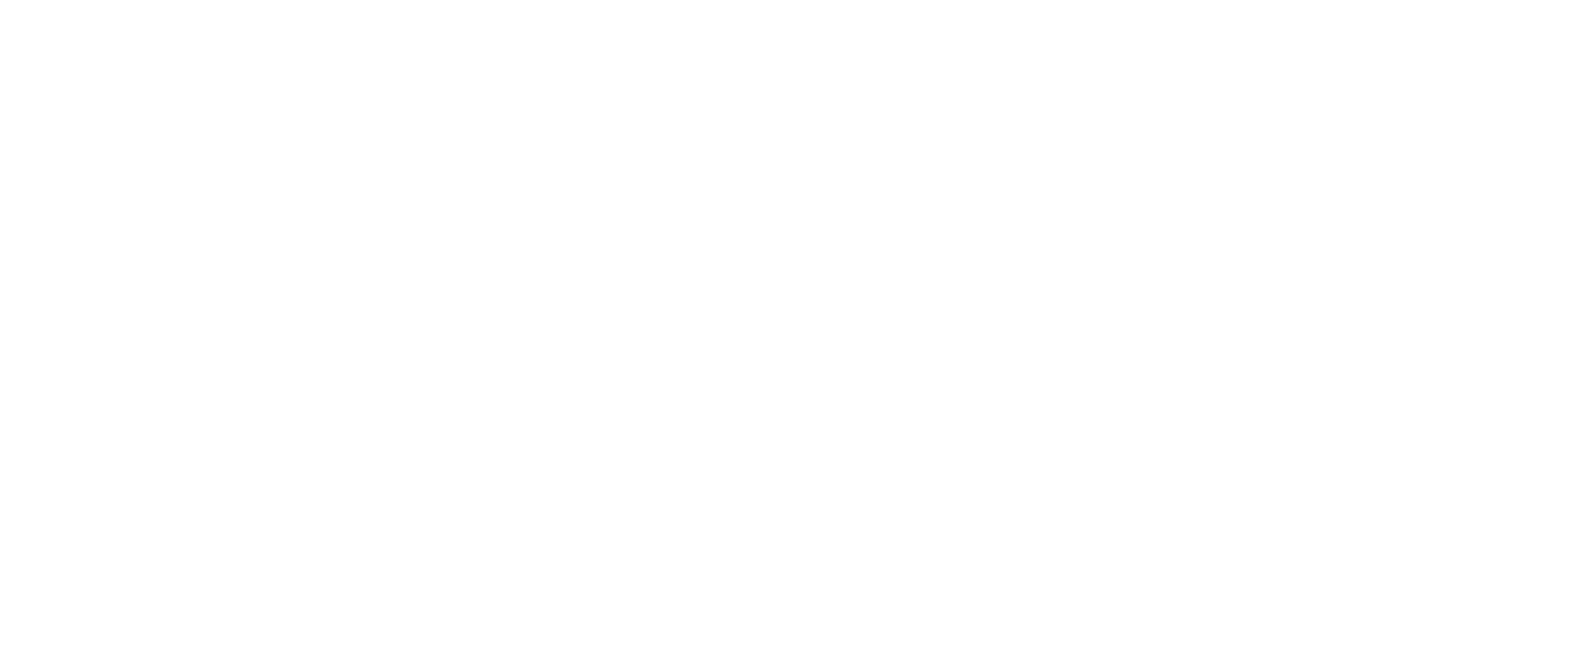 Dr.G - The Beginning of a Healthy Skin